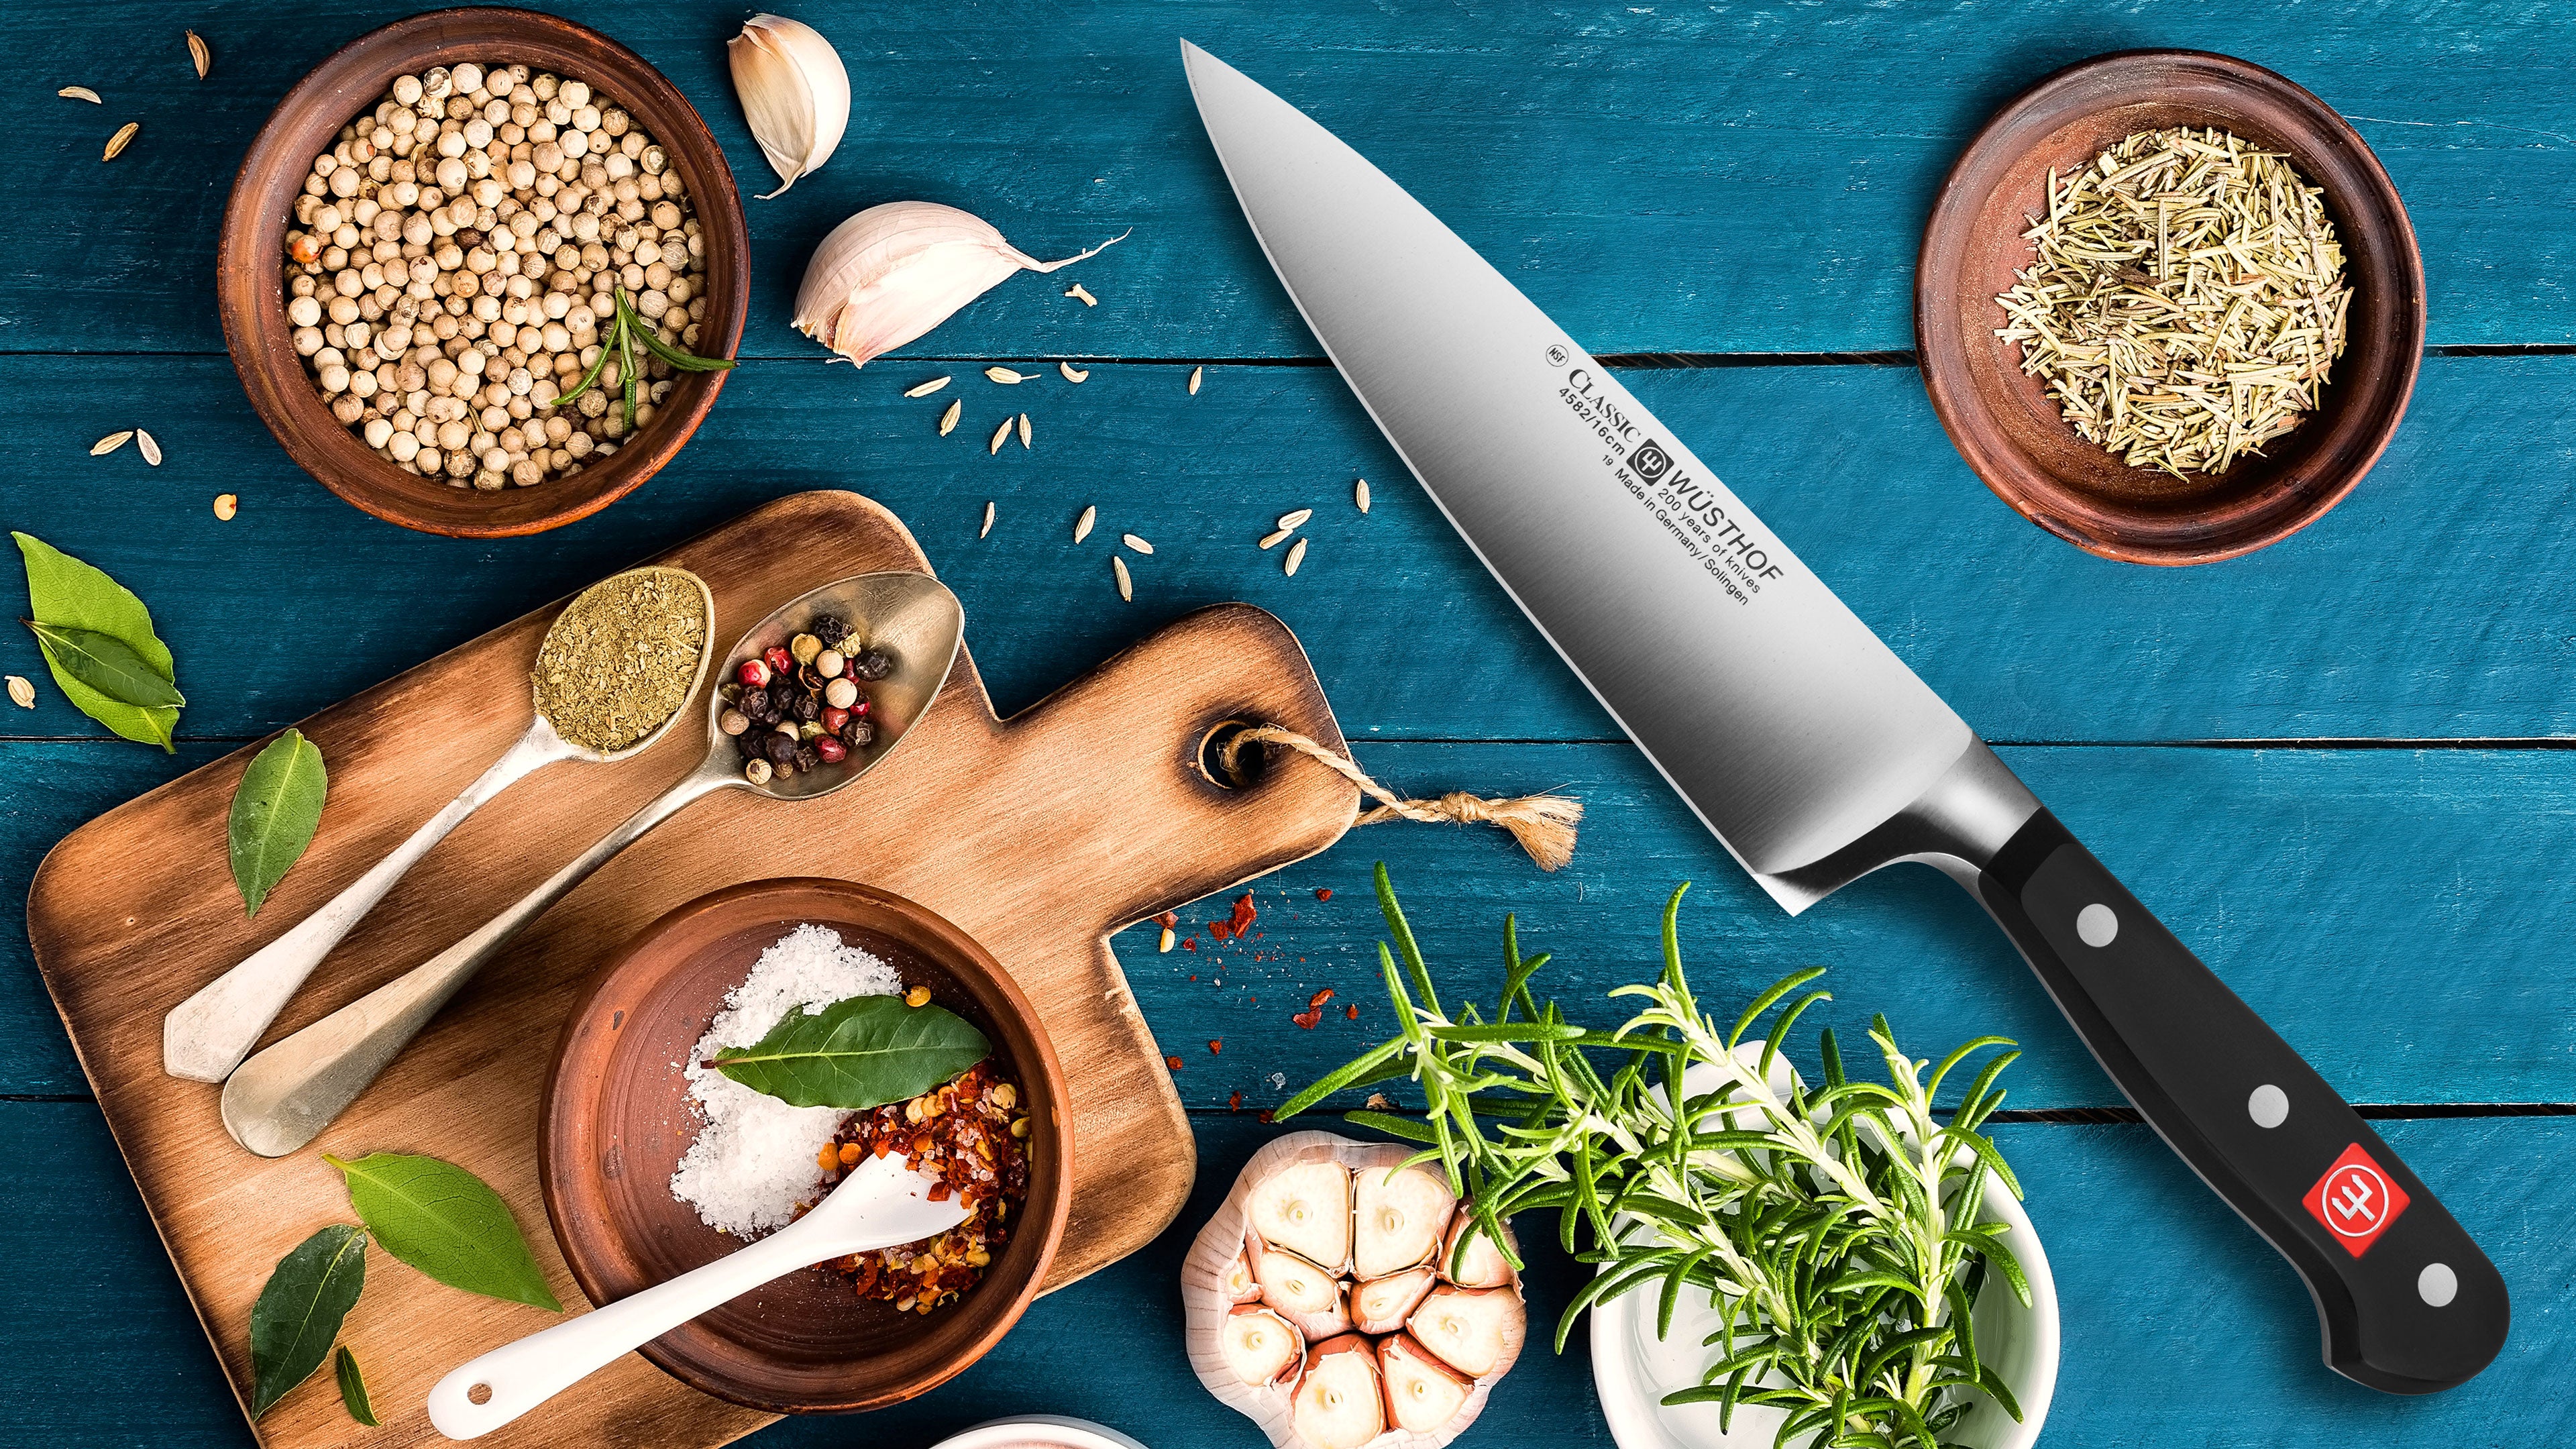 How to Choose the Right Kitchen Knife for the Right Job